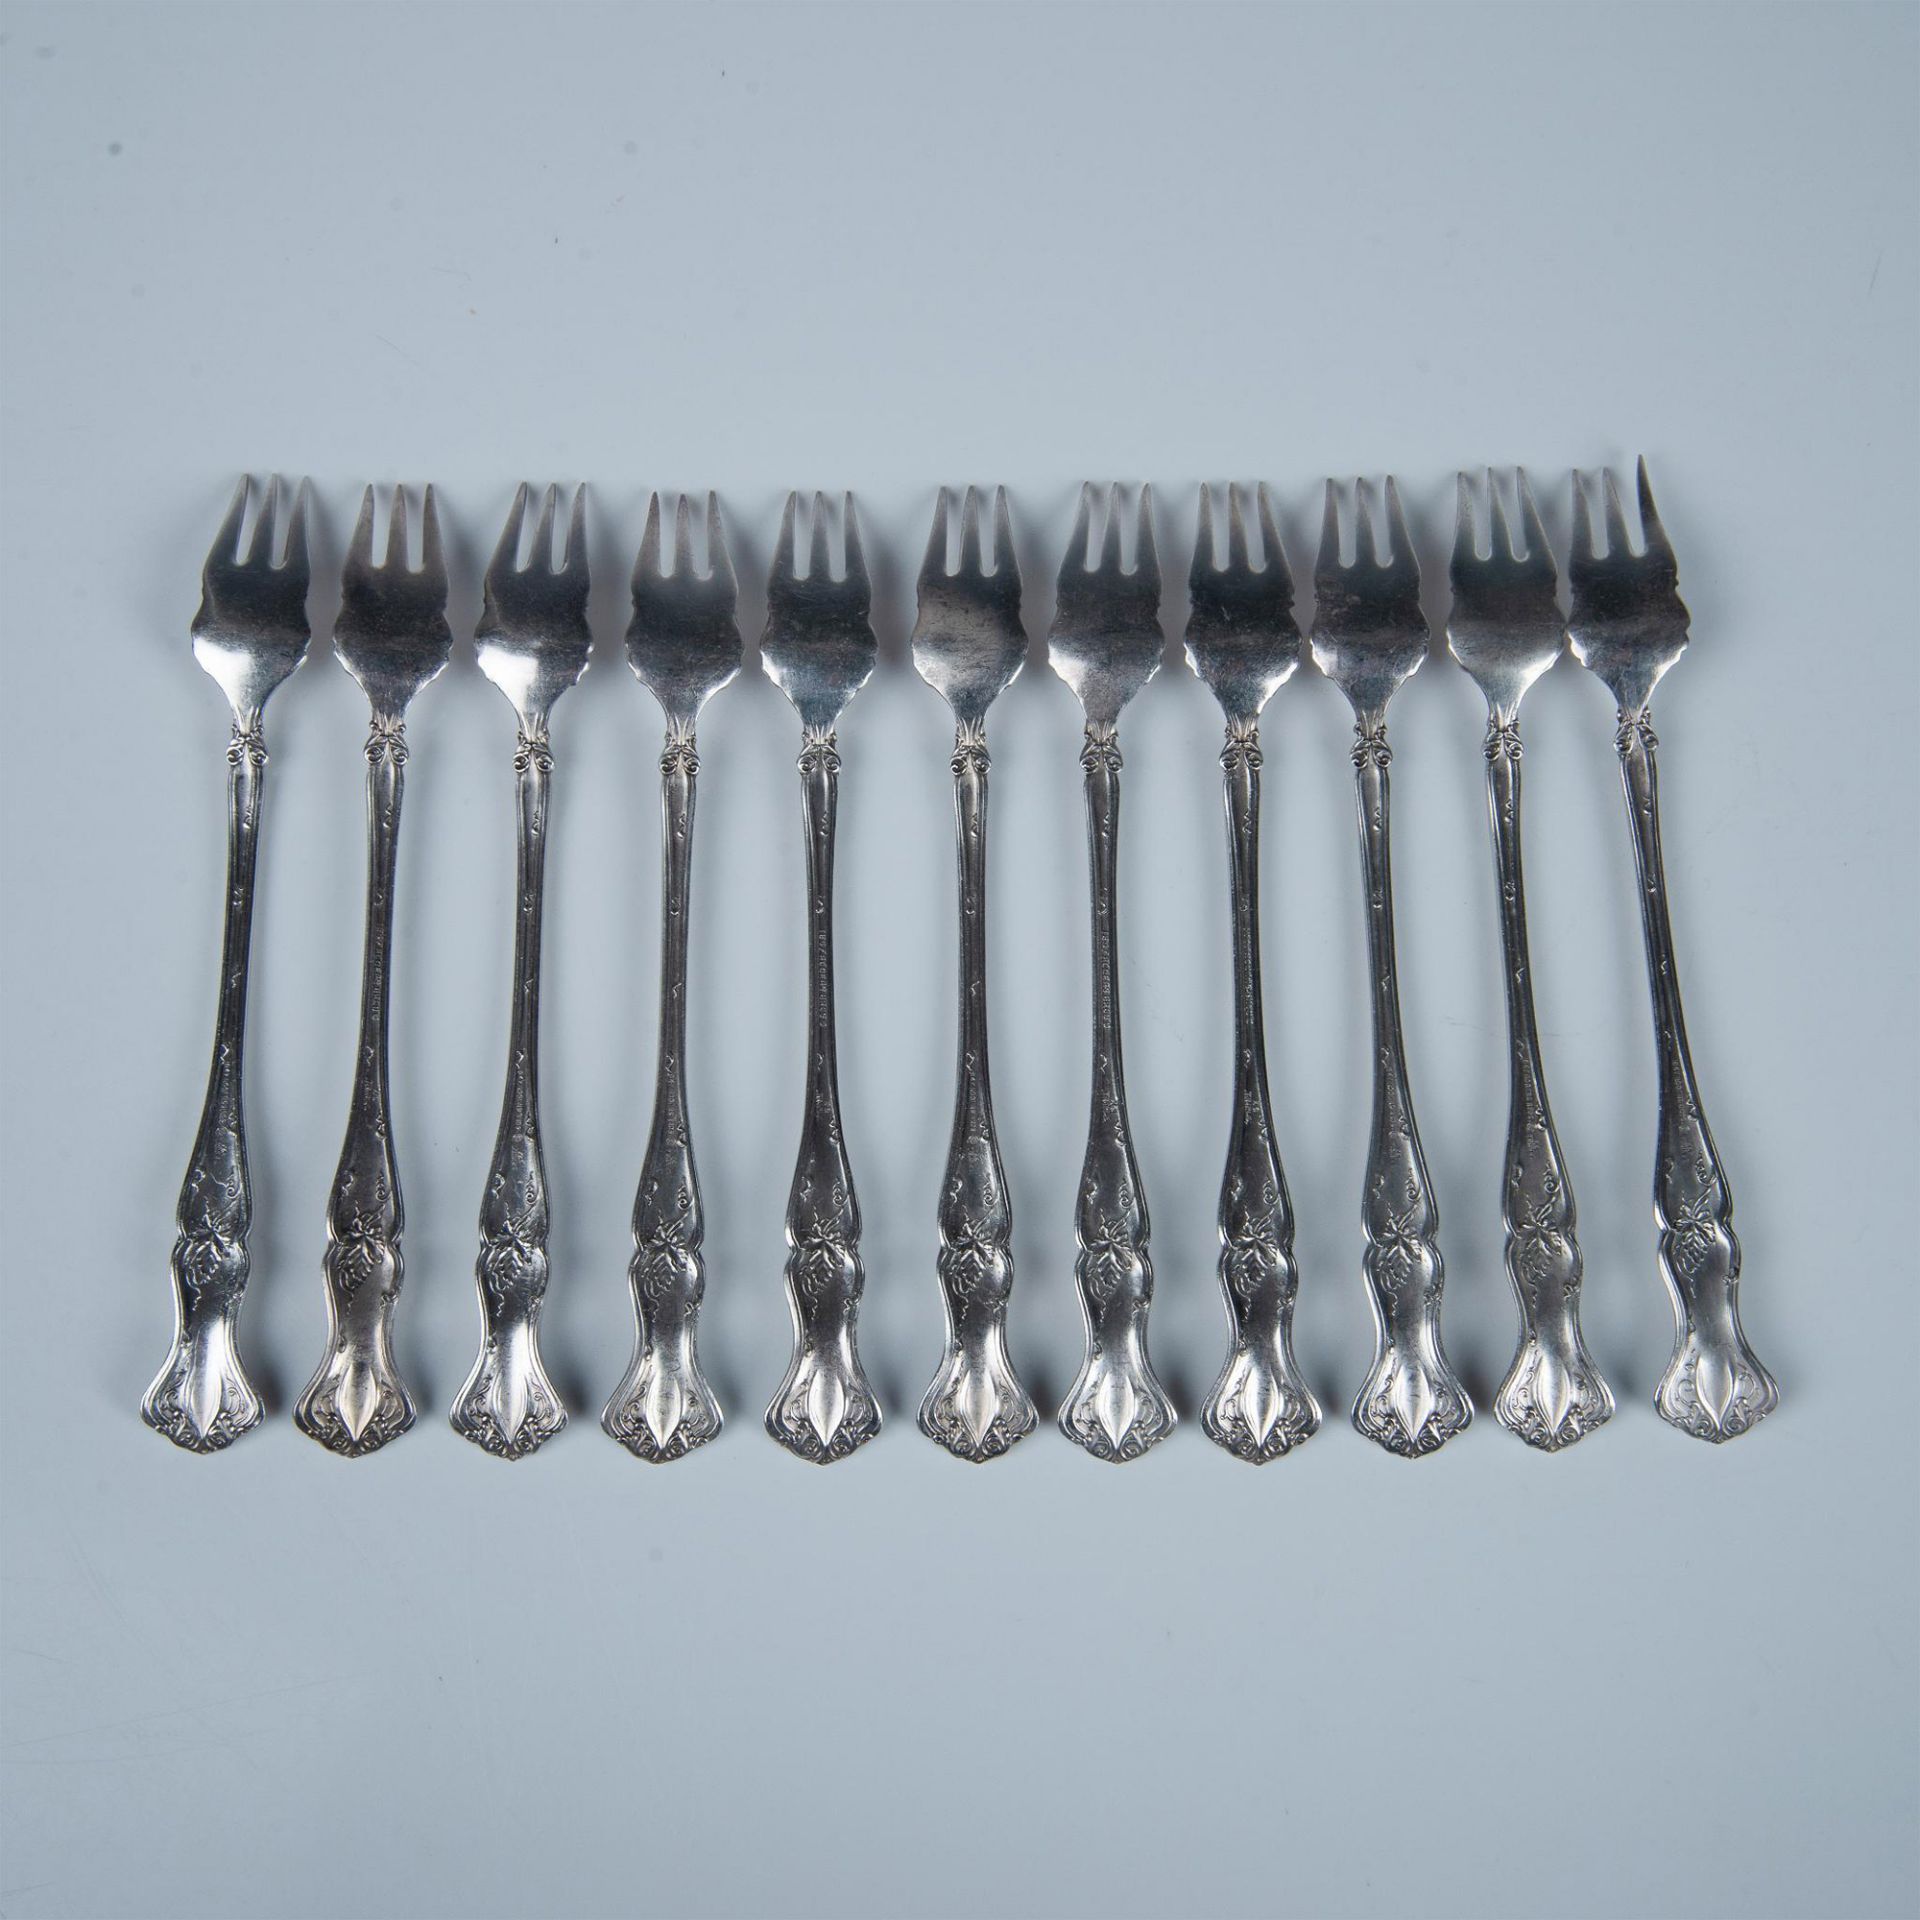 11pc Rogers Bros. 1847 Silverplate Oyster Forks, Vintage - Image 2 of 5